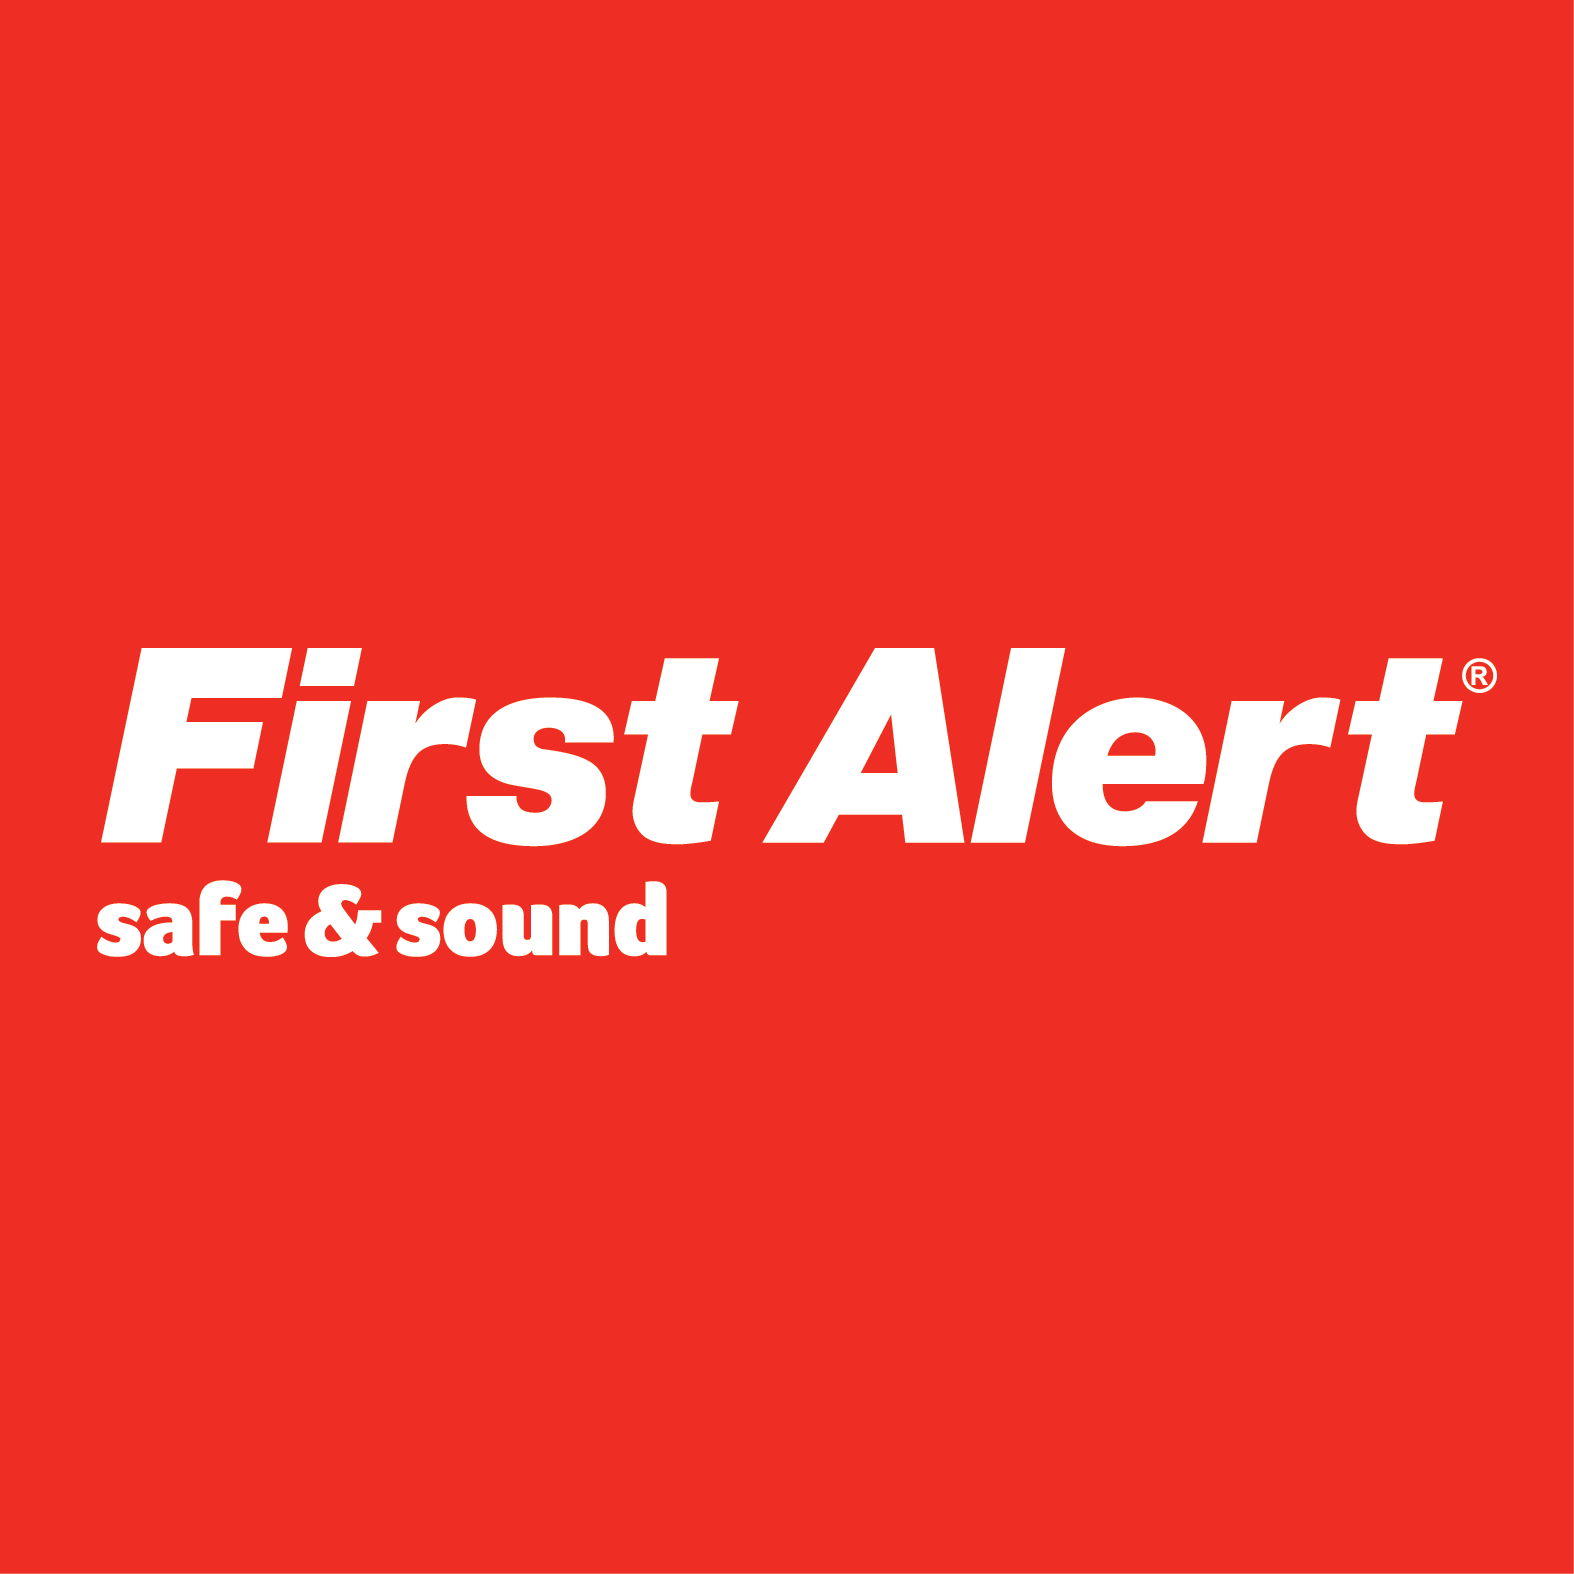 First Alert has been manufacturing, marketing and selling home safety products for over 40 years.